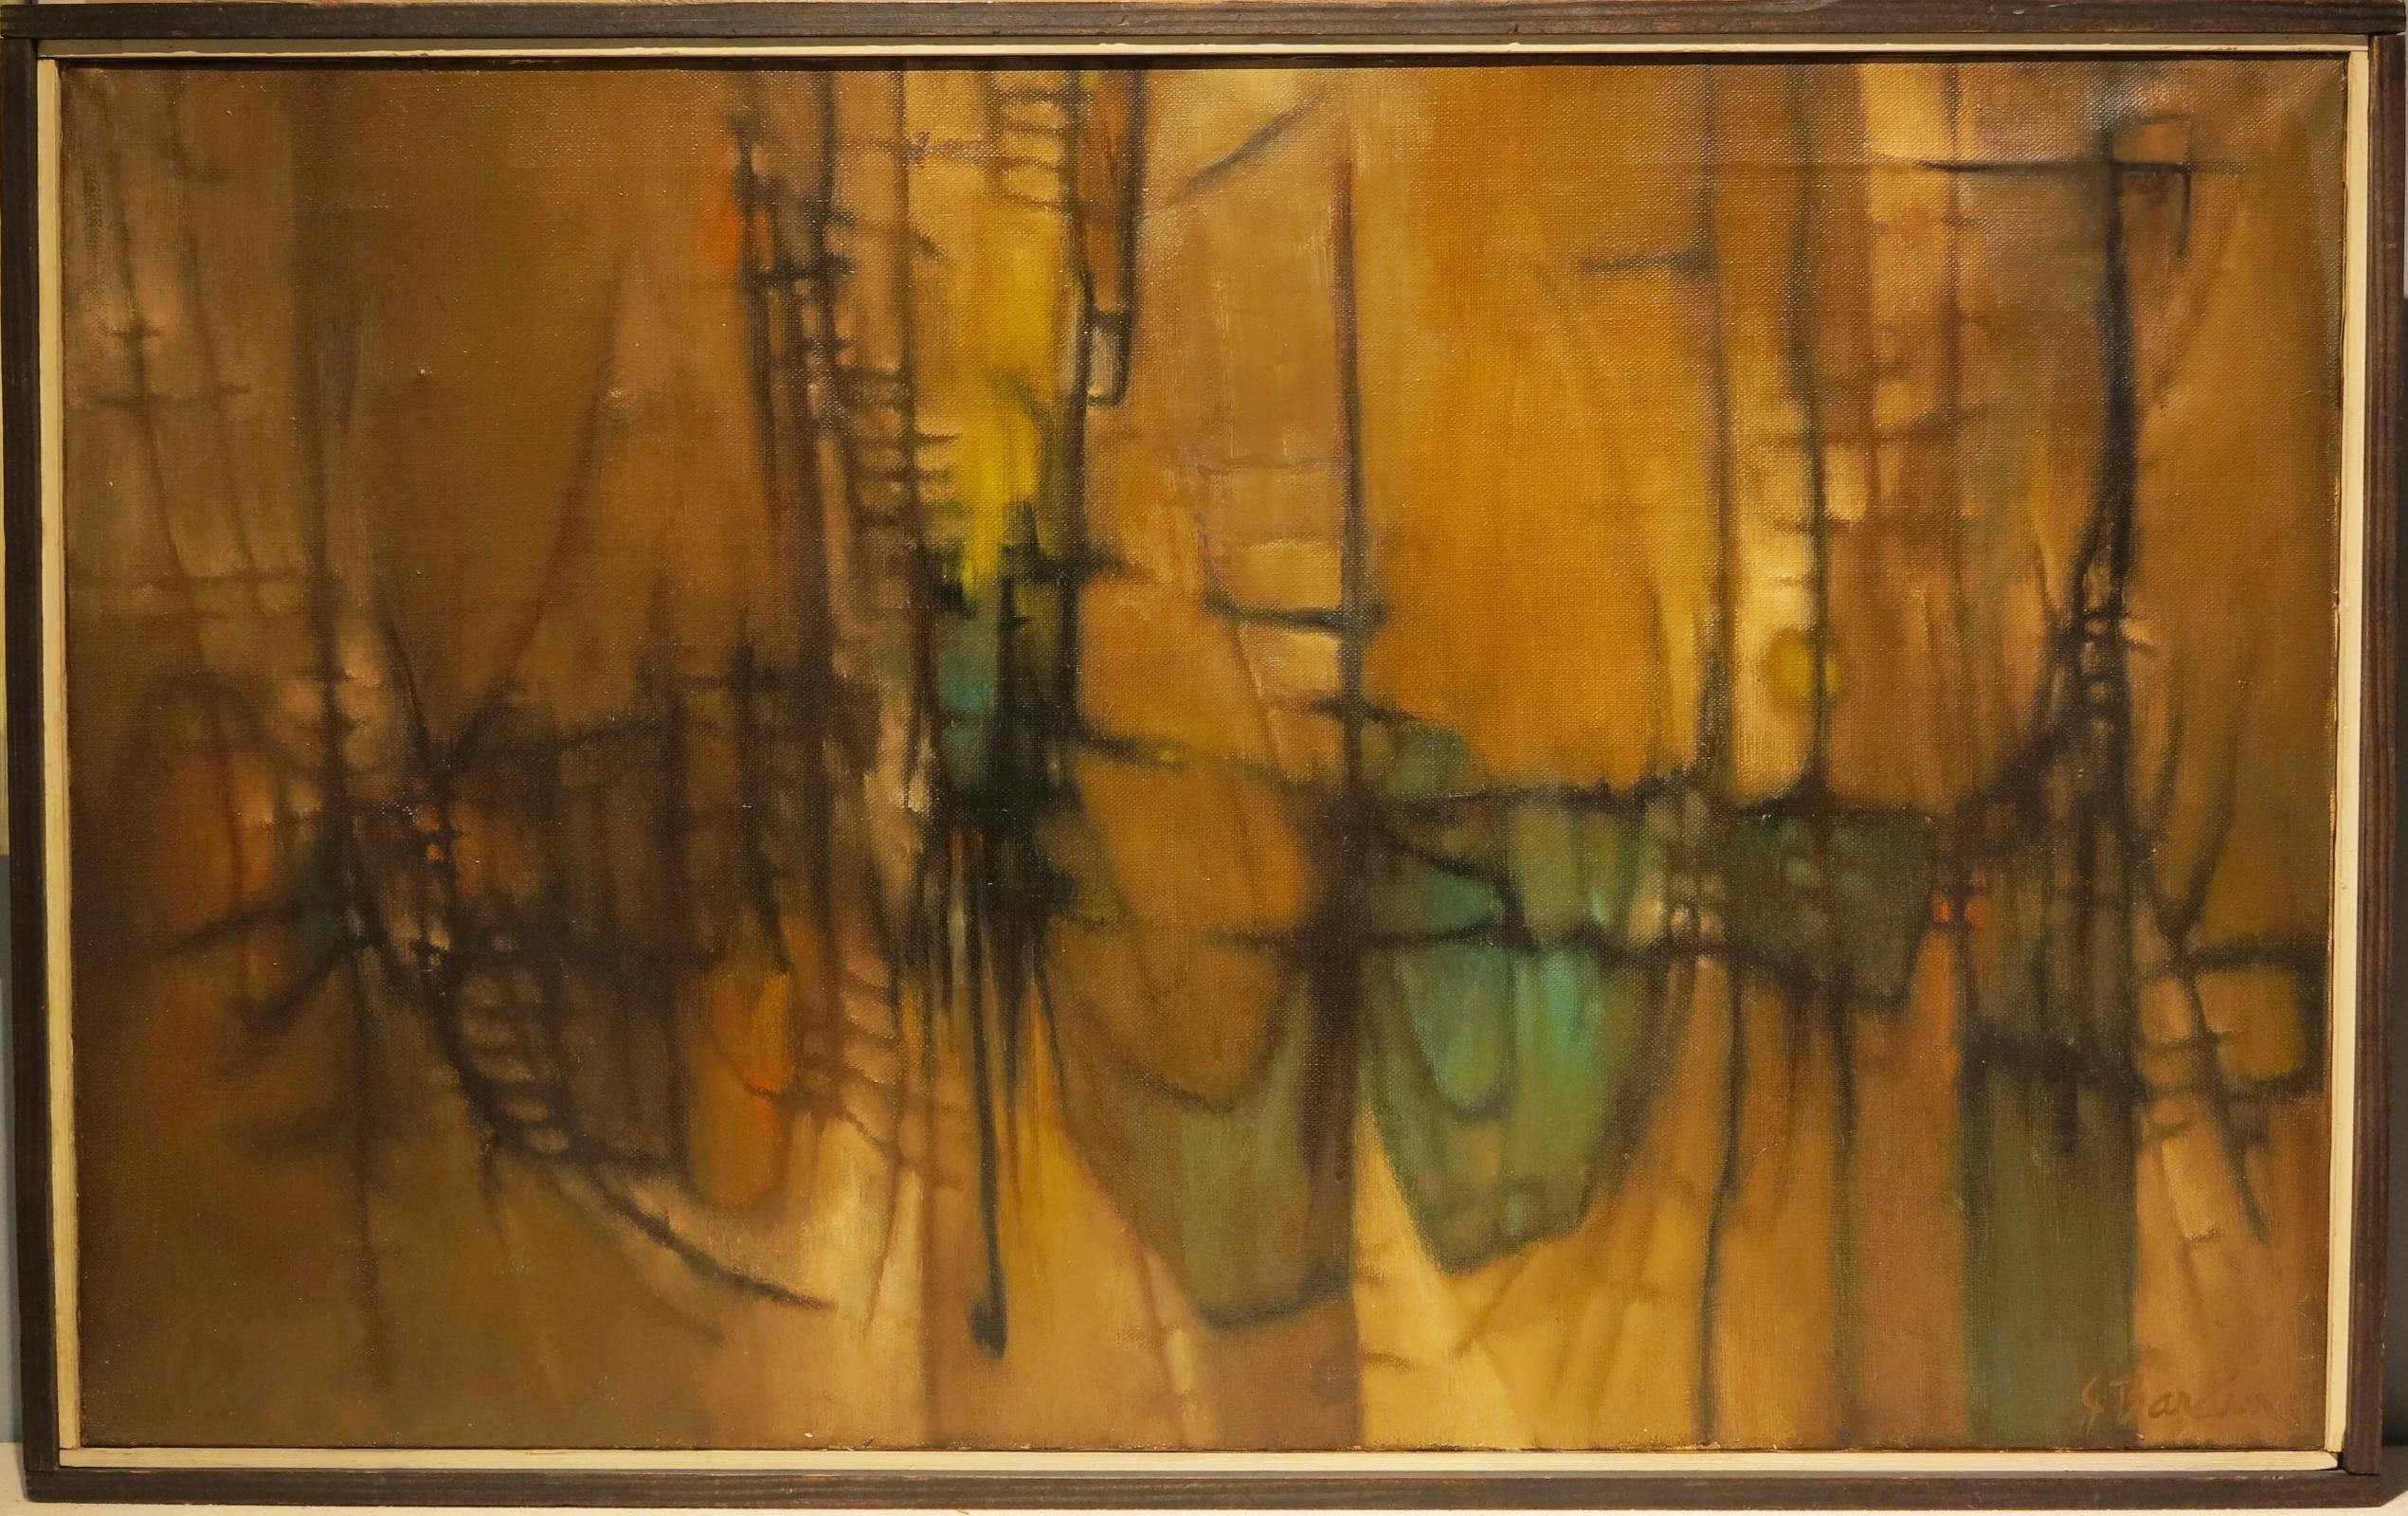 Web & Accents on Tan (Mid-century abstract expressionist composition) - Painting by Jesse Redwin Bardin